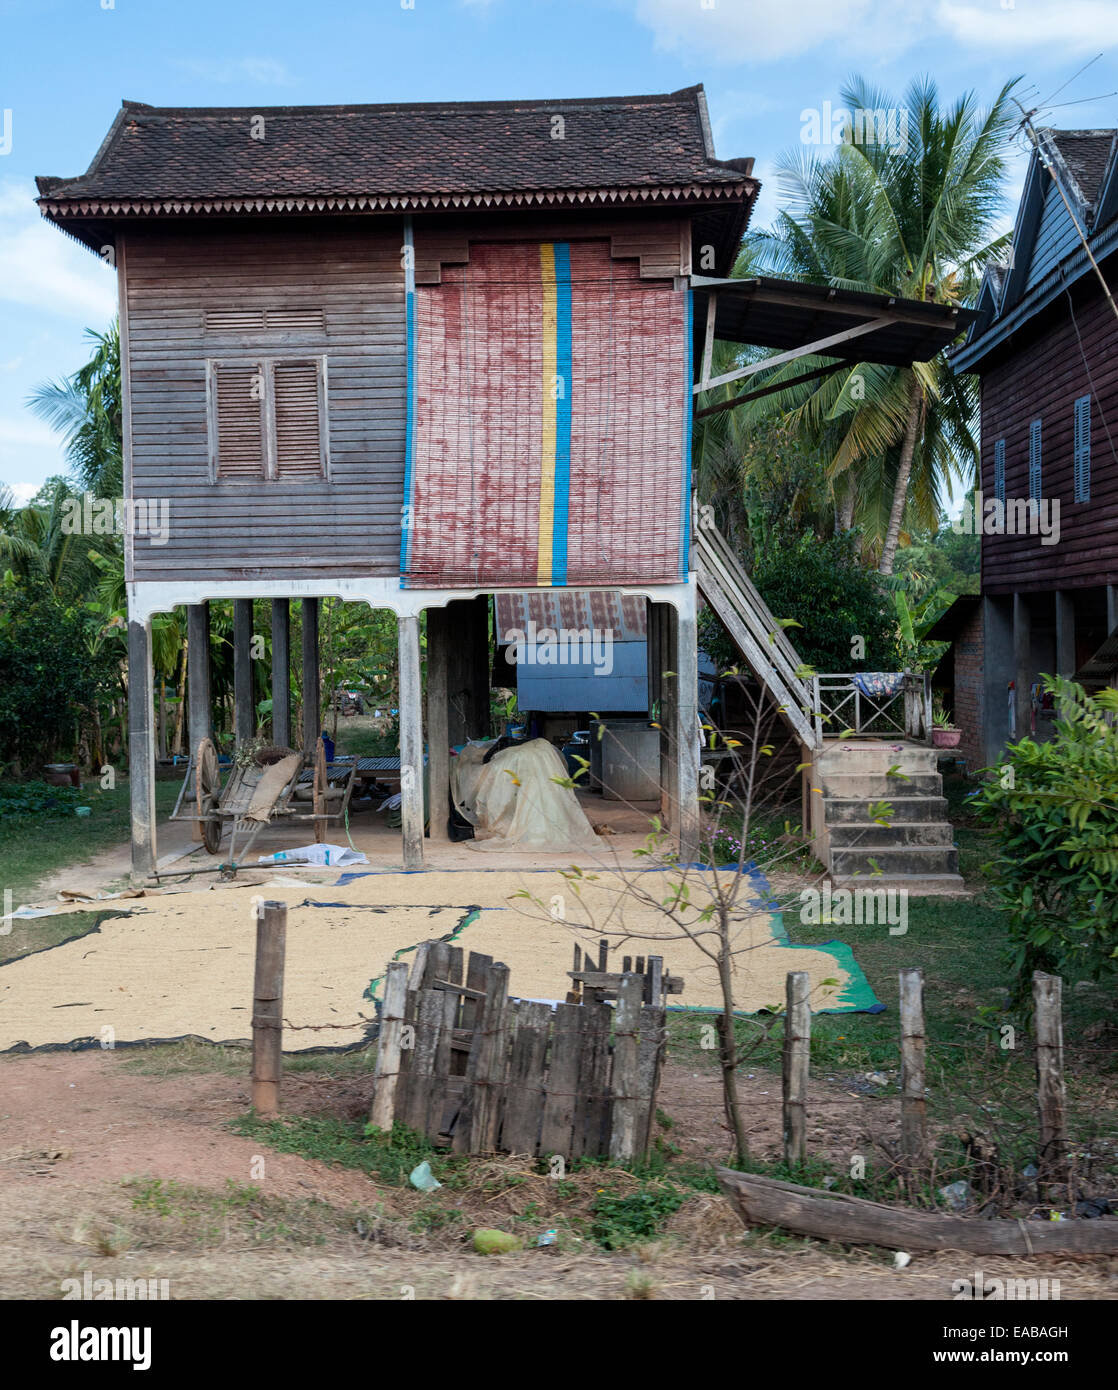 Cambodia Typical Rural House With Living Quarters Above The Ground